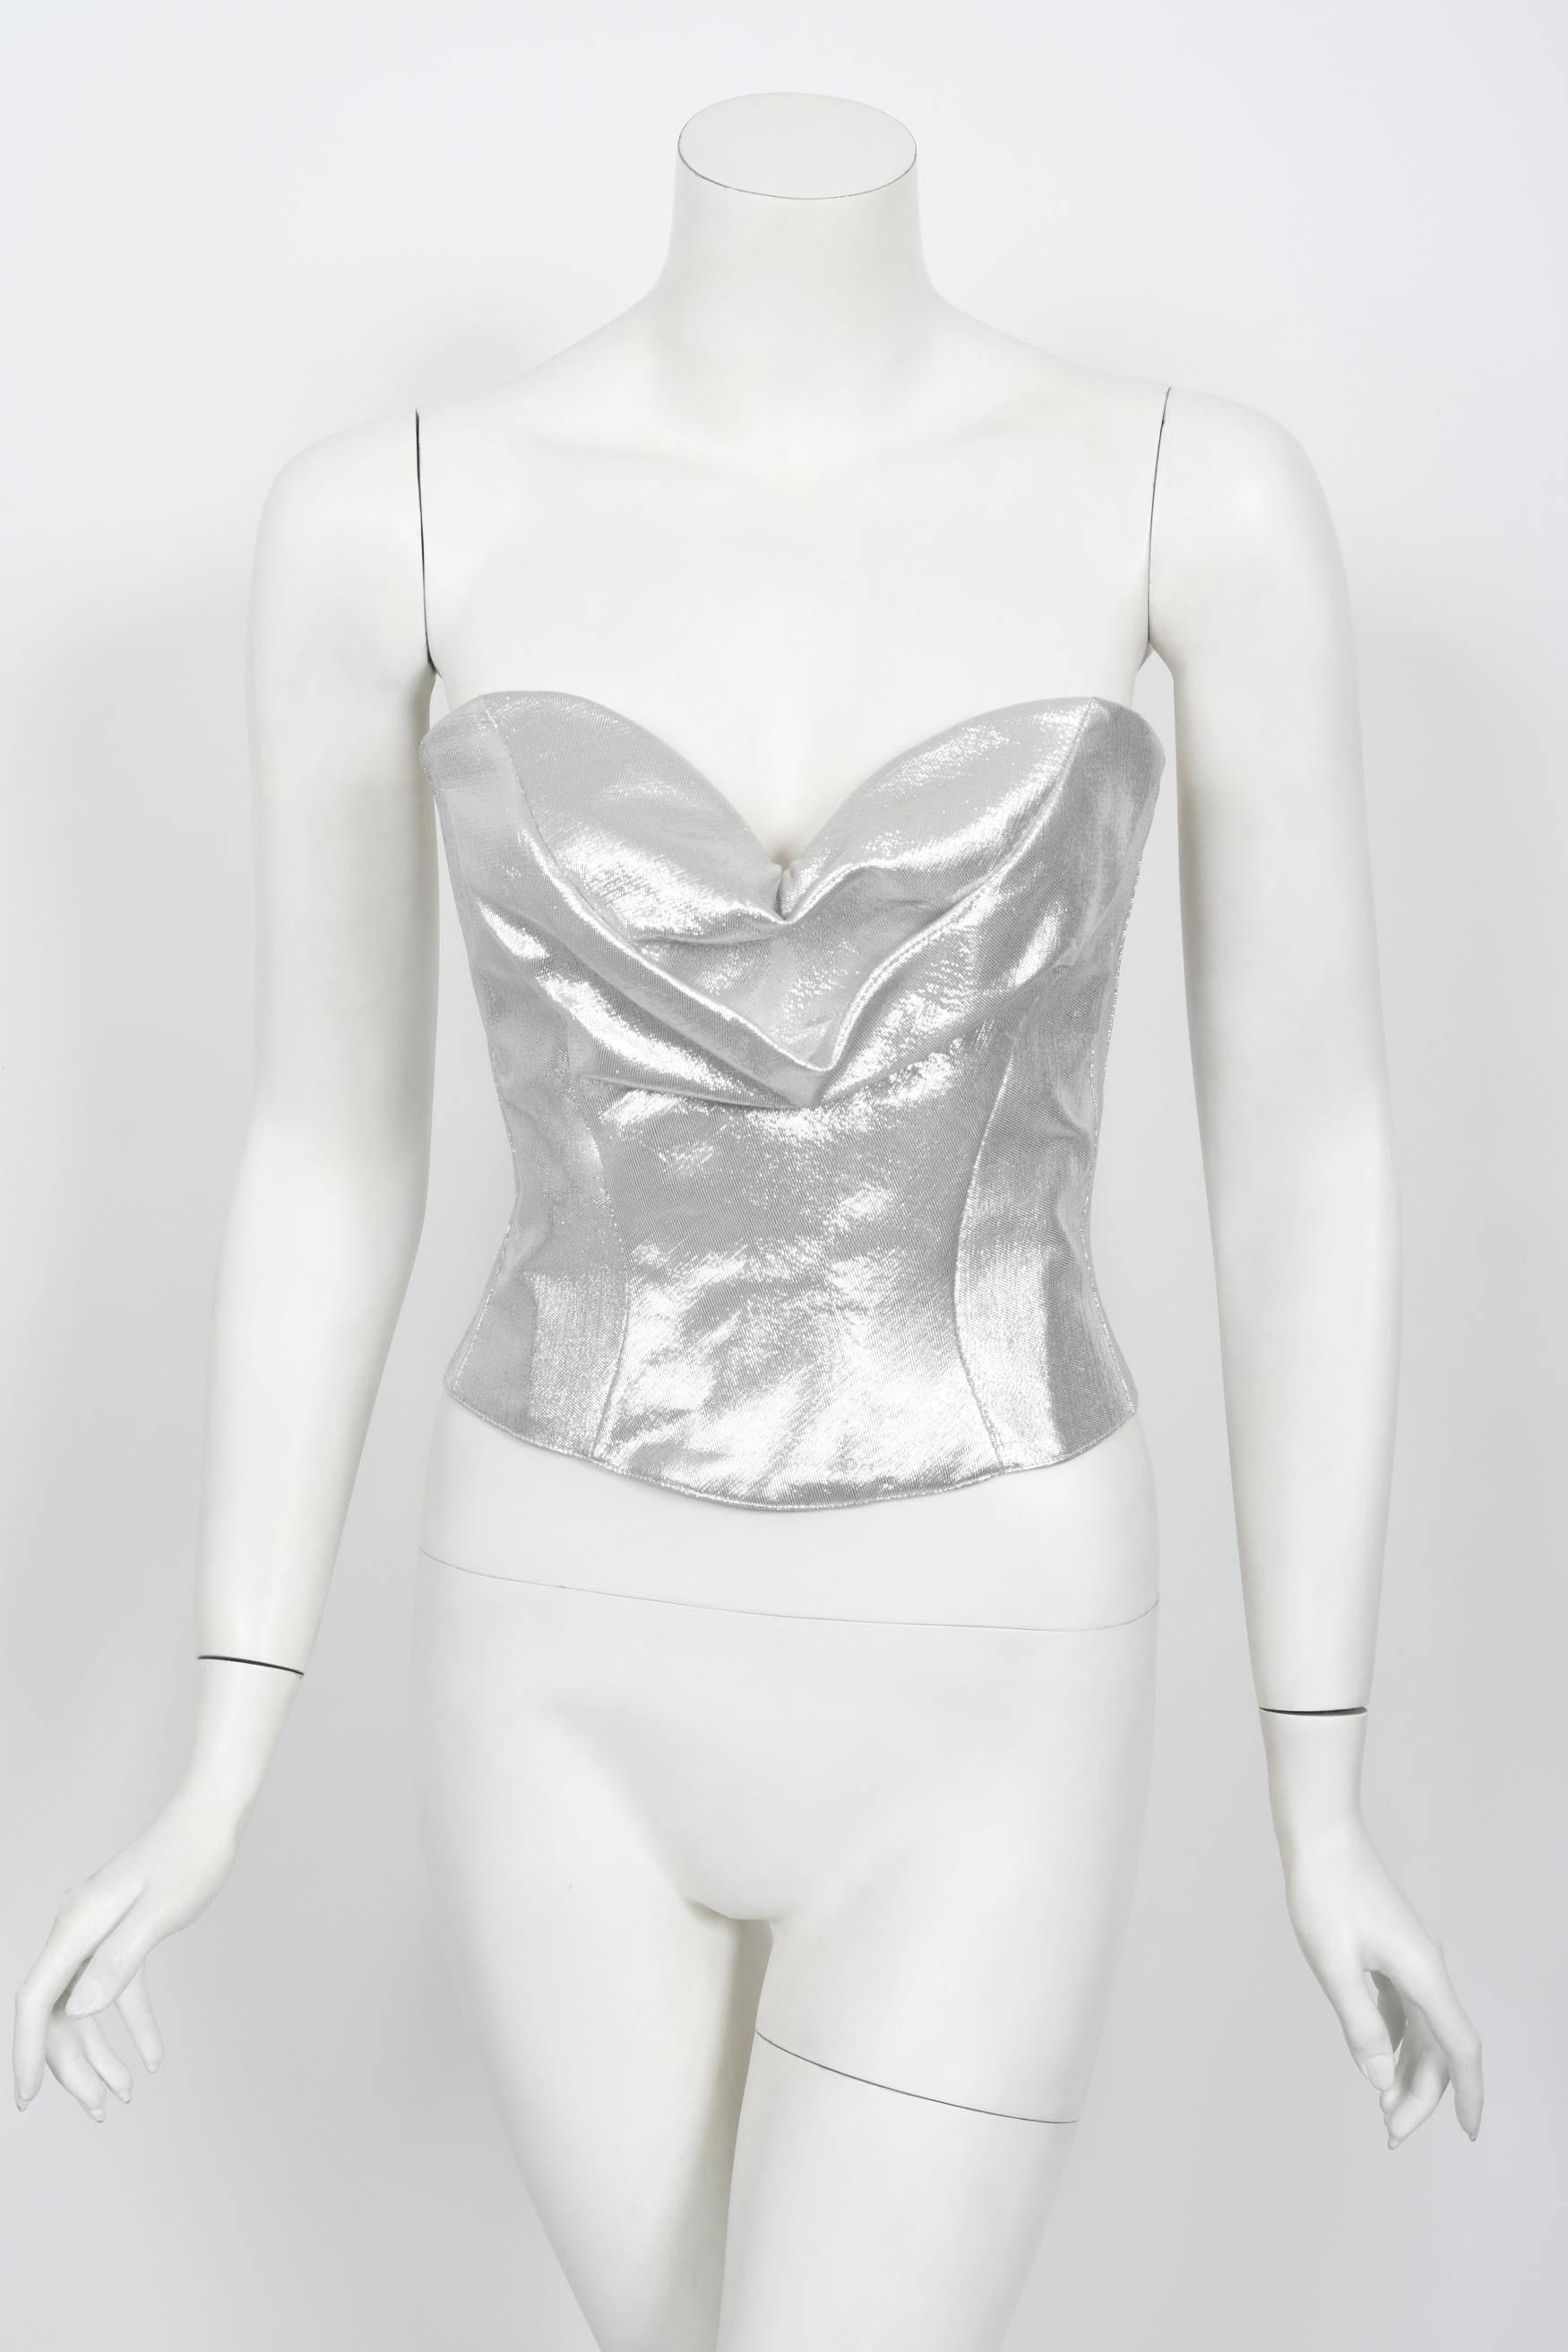 Iconic 1992 Thierry Mugler Couture Metallic Silver Blue Bustier Mini Skirt Suit 10